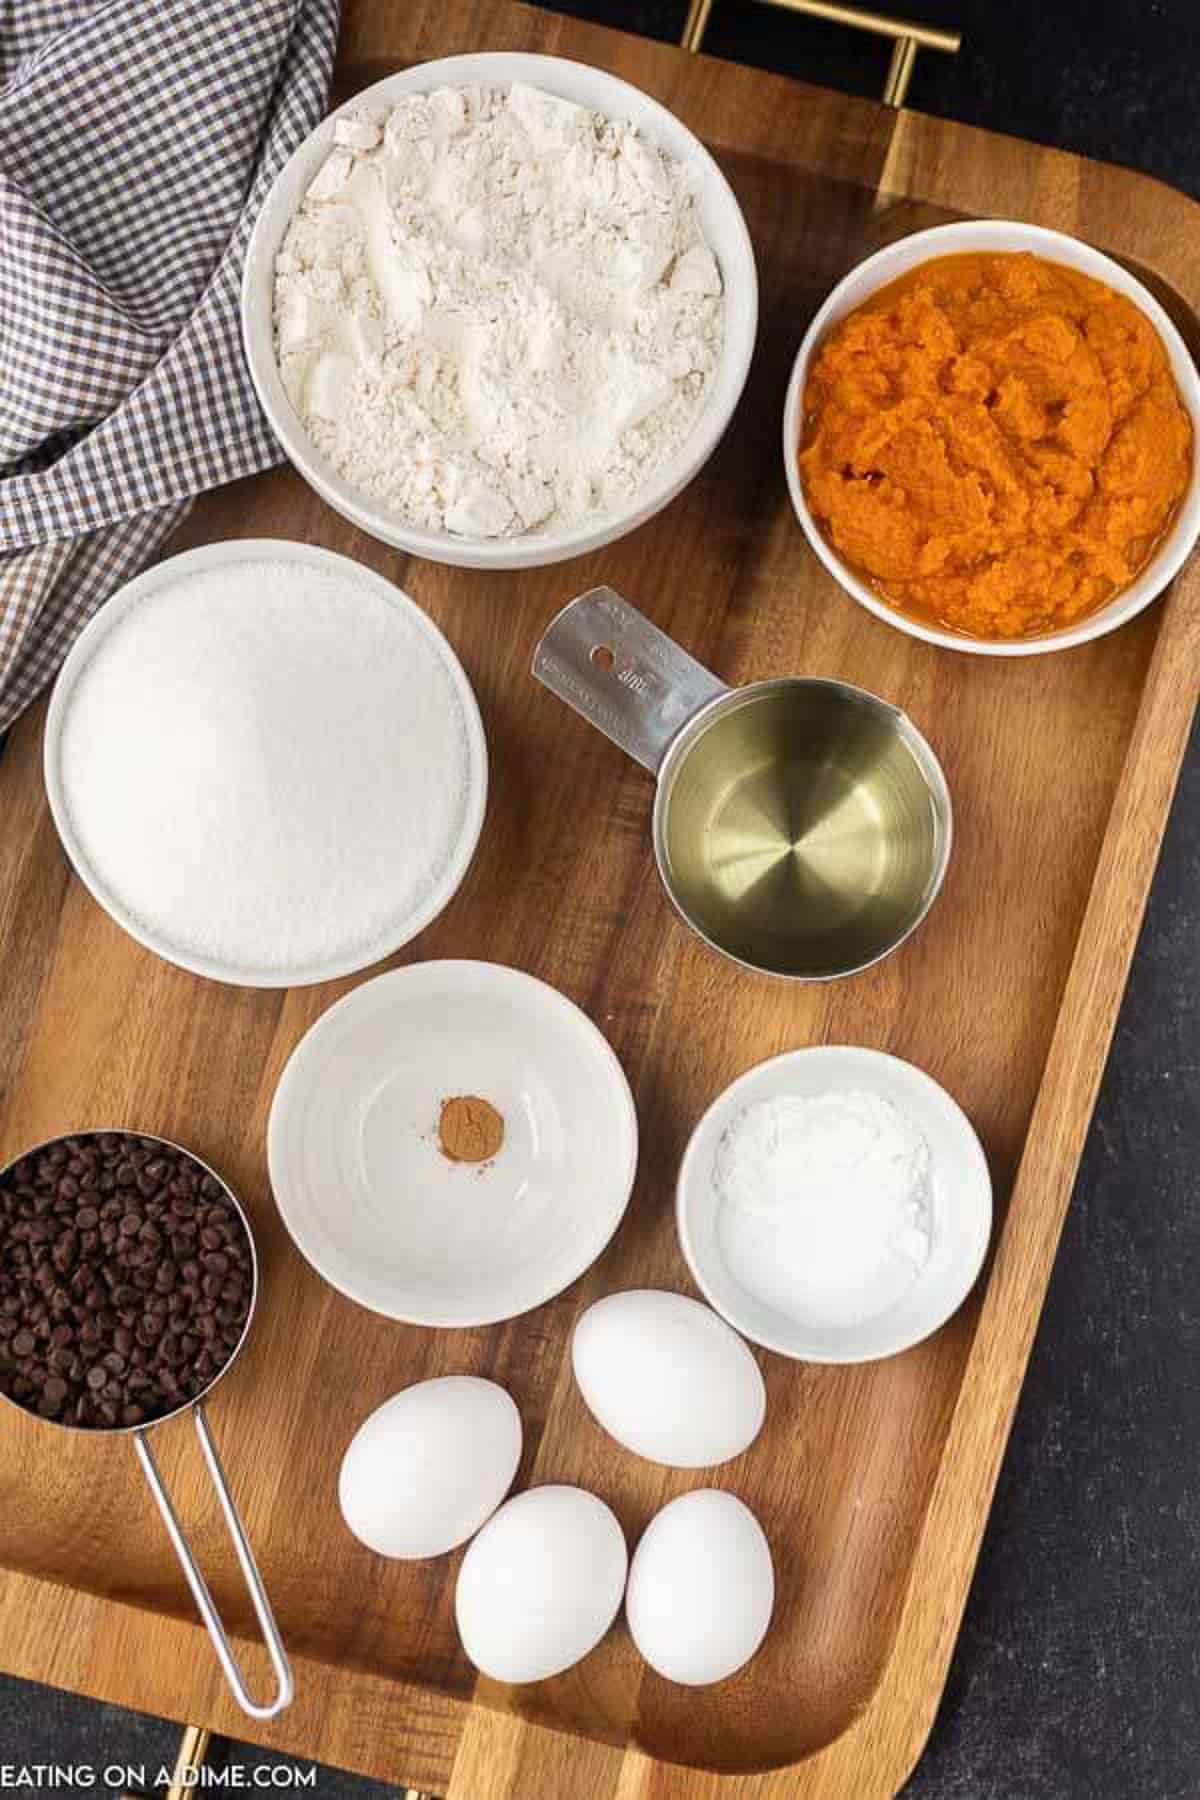 The ingredients needed to make pumpkin chocolate chip bars: flour, sugar, baking powder, baking soda, pumkin pie spice, eggs, canned pumpkin, oil and mini chocolate chips 